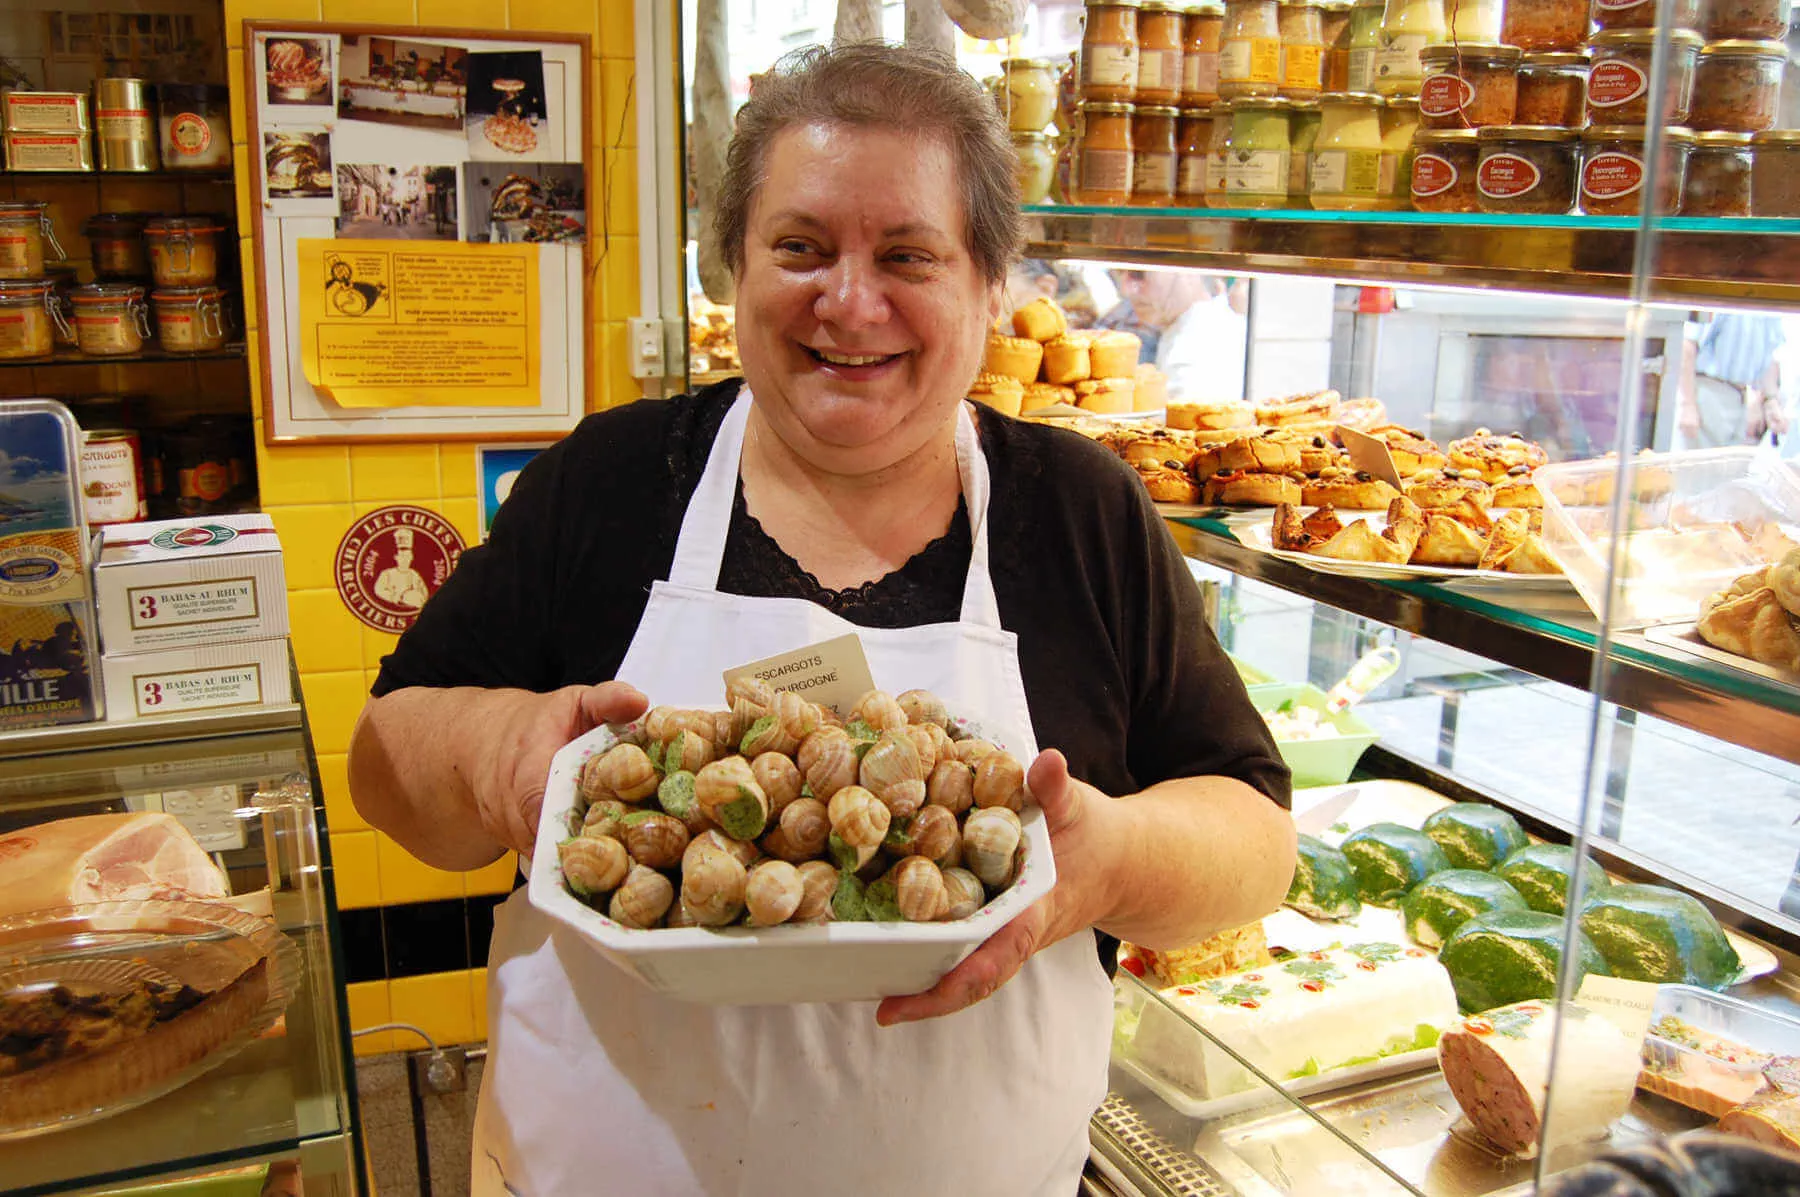 The escargot lady wants you to serve the right wine with her snails — make it flinty